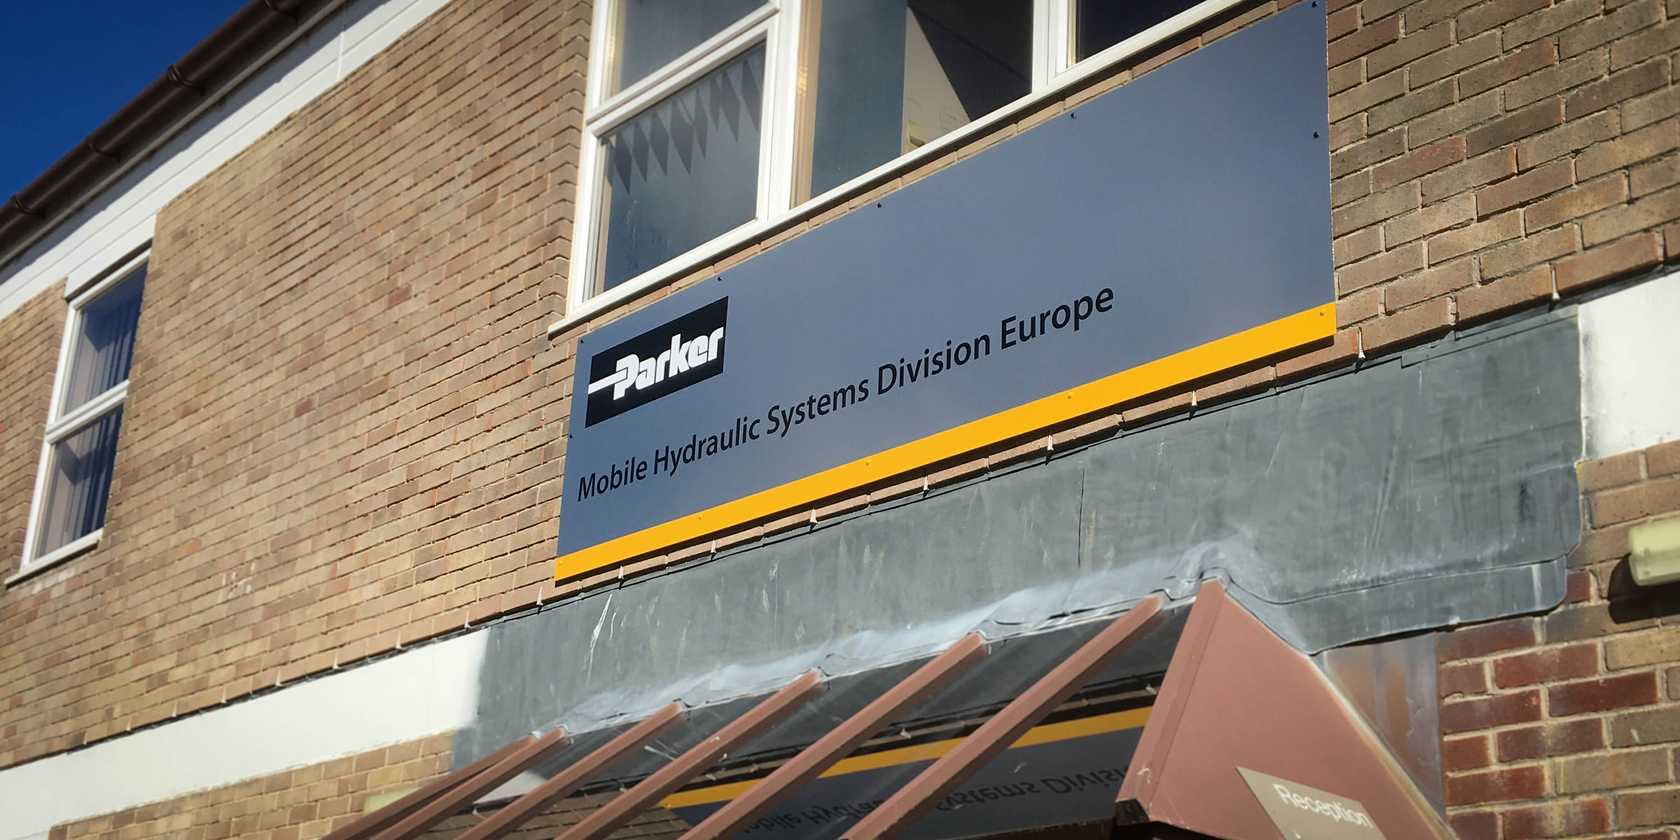 External Wall Mounted Sign for Parker Hannifin